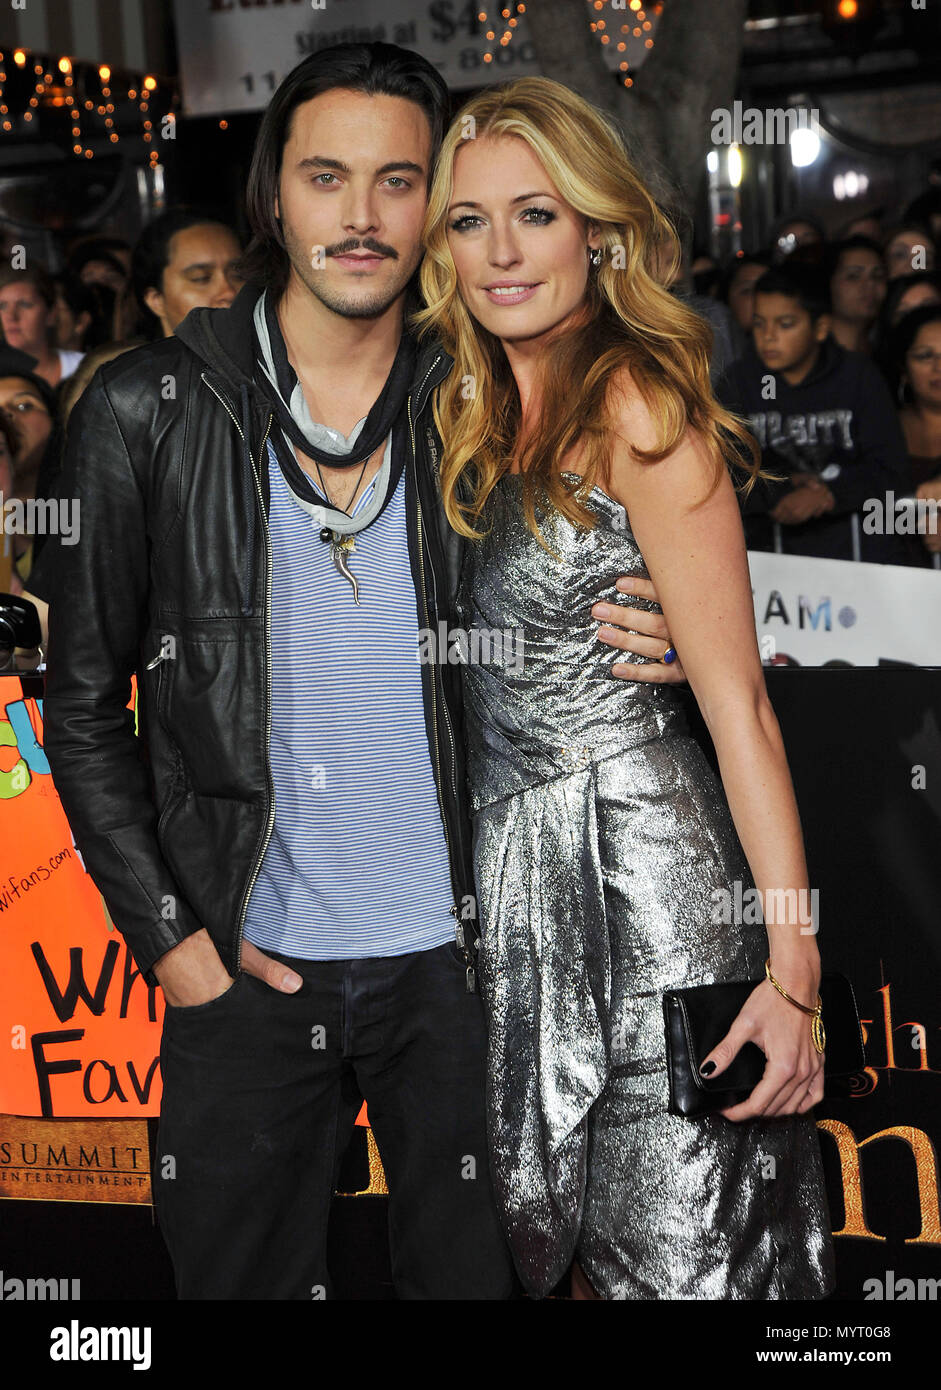 Cat Deeley + Jack Huston - THE TWILIGHT SAGA NEW MOON Premiere at the  Westwood Village Theatre In Los Angeles.Cat Deeley + Jack Huston 175 Event  in Hollywood Life - California, Red